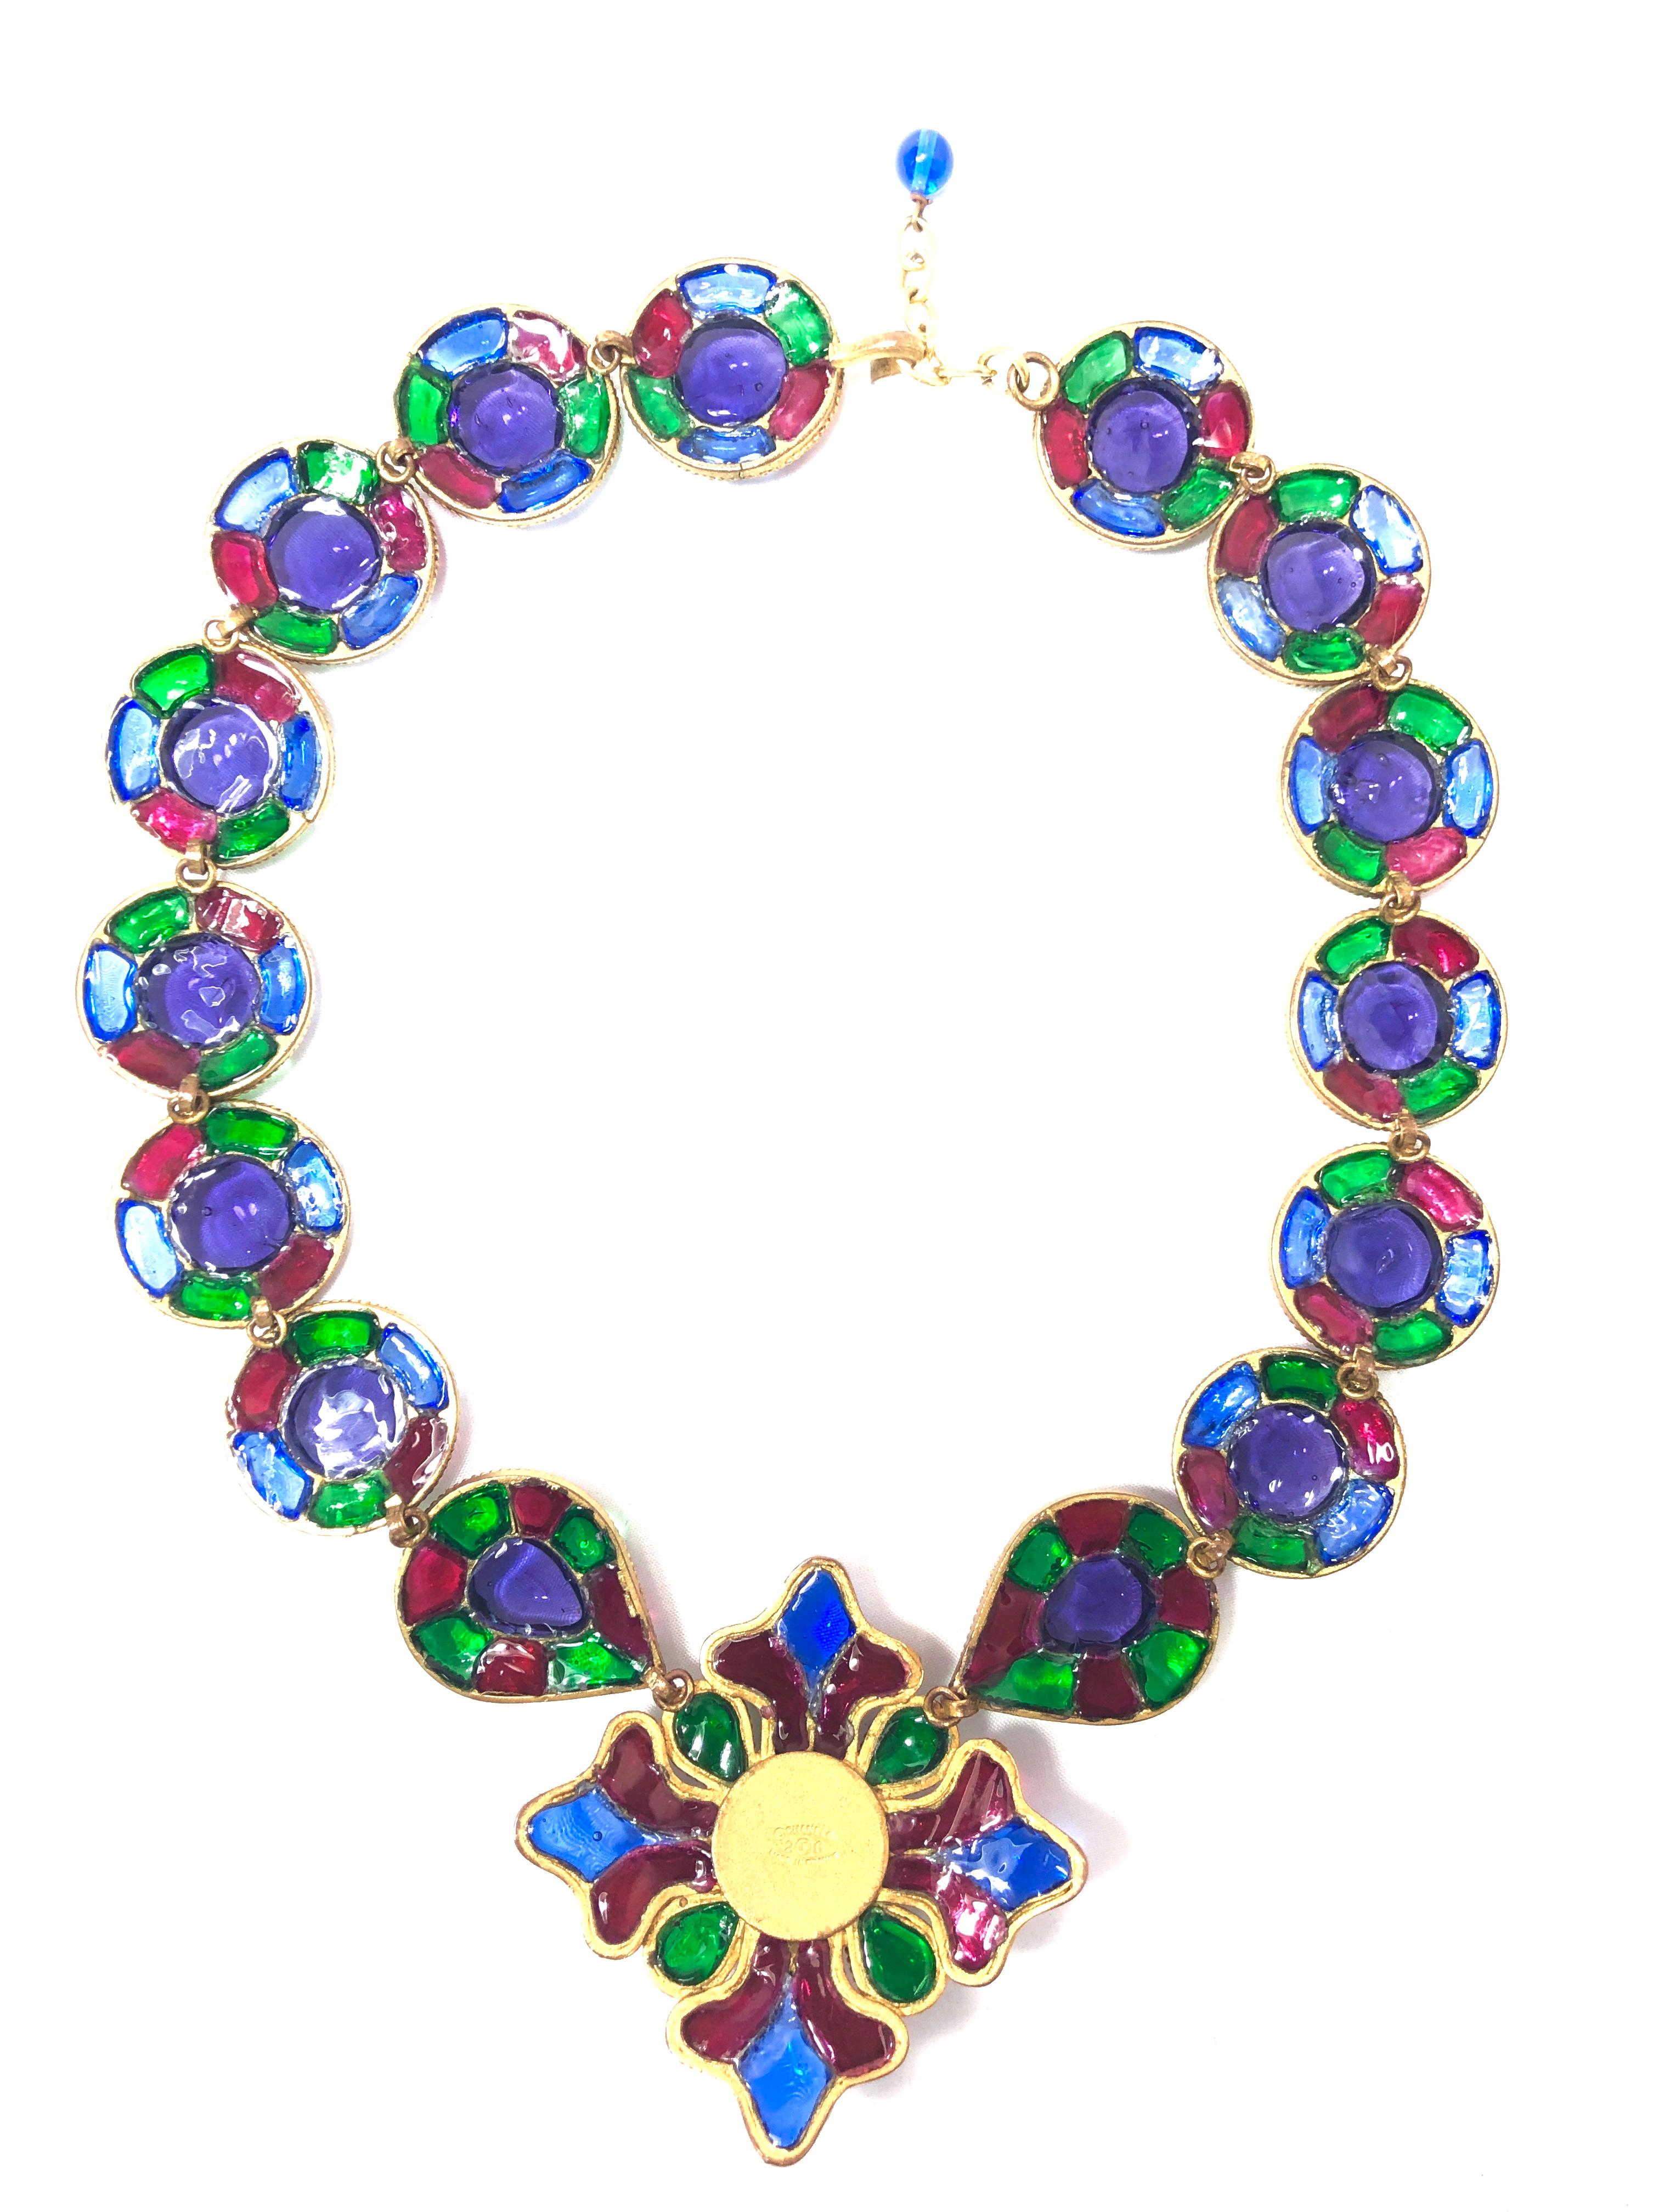 Chanel Masterpiece 80s Gripoix Glass Byzantine Style Necklace & Earrings For Sale 2